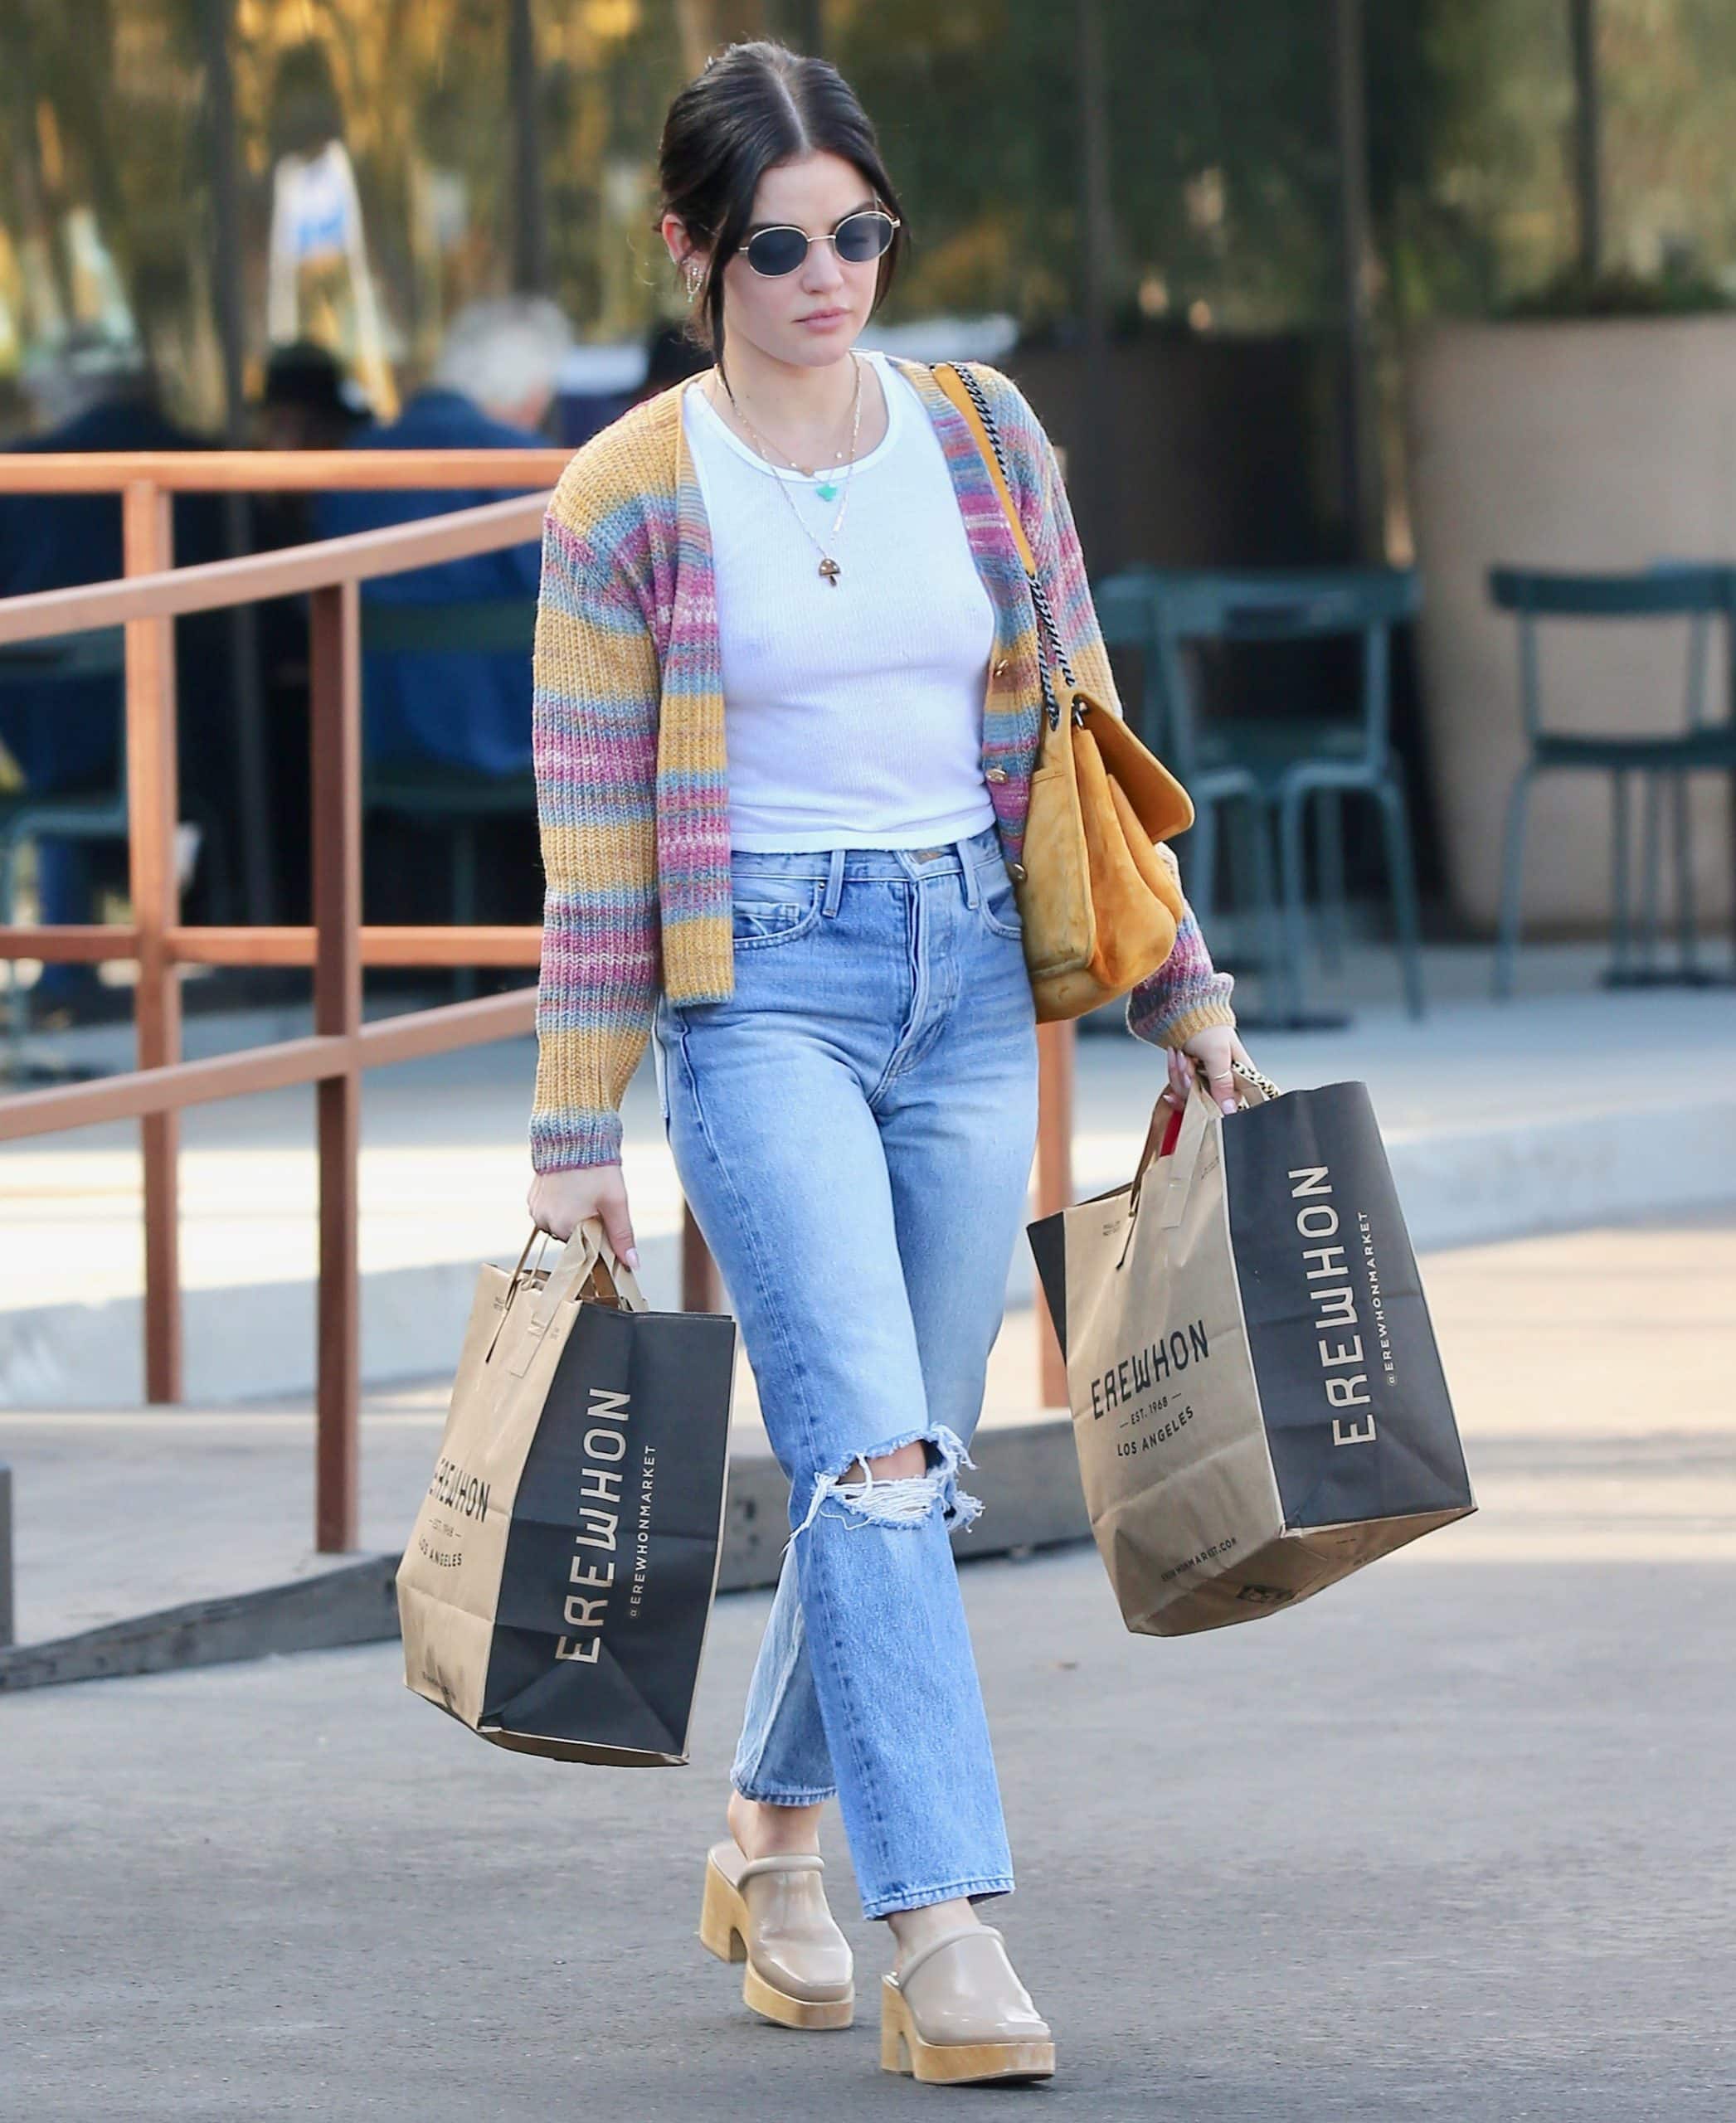 Lucy Hale goes braless while buying groceries at Erewhon Organic Grocers in Los Angeles on December 20, 2021